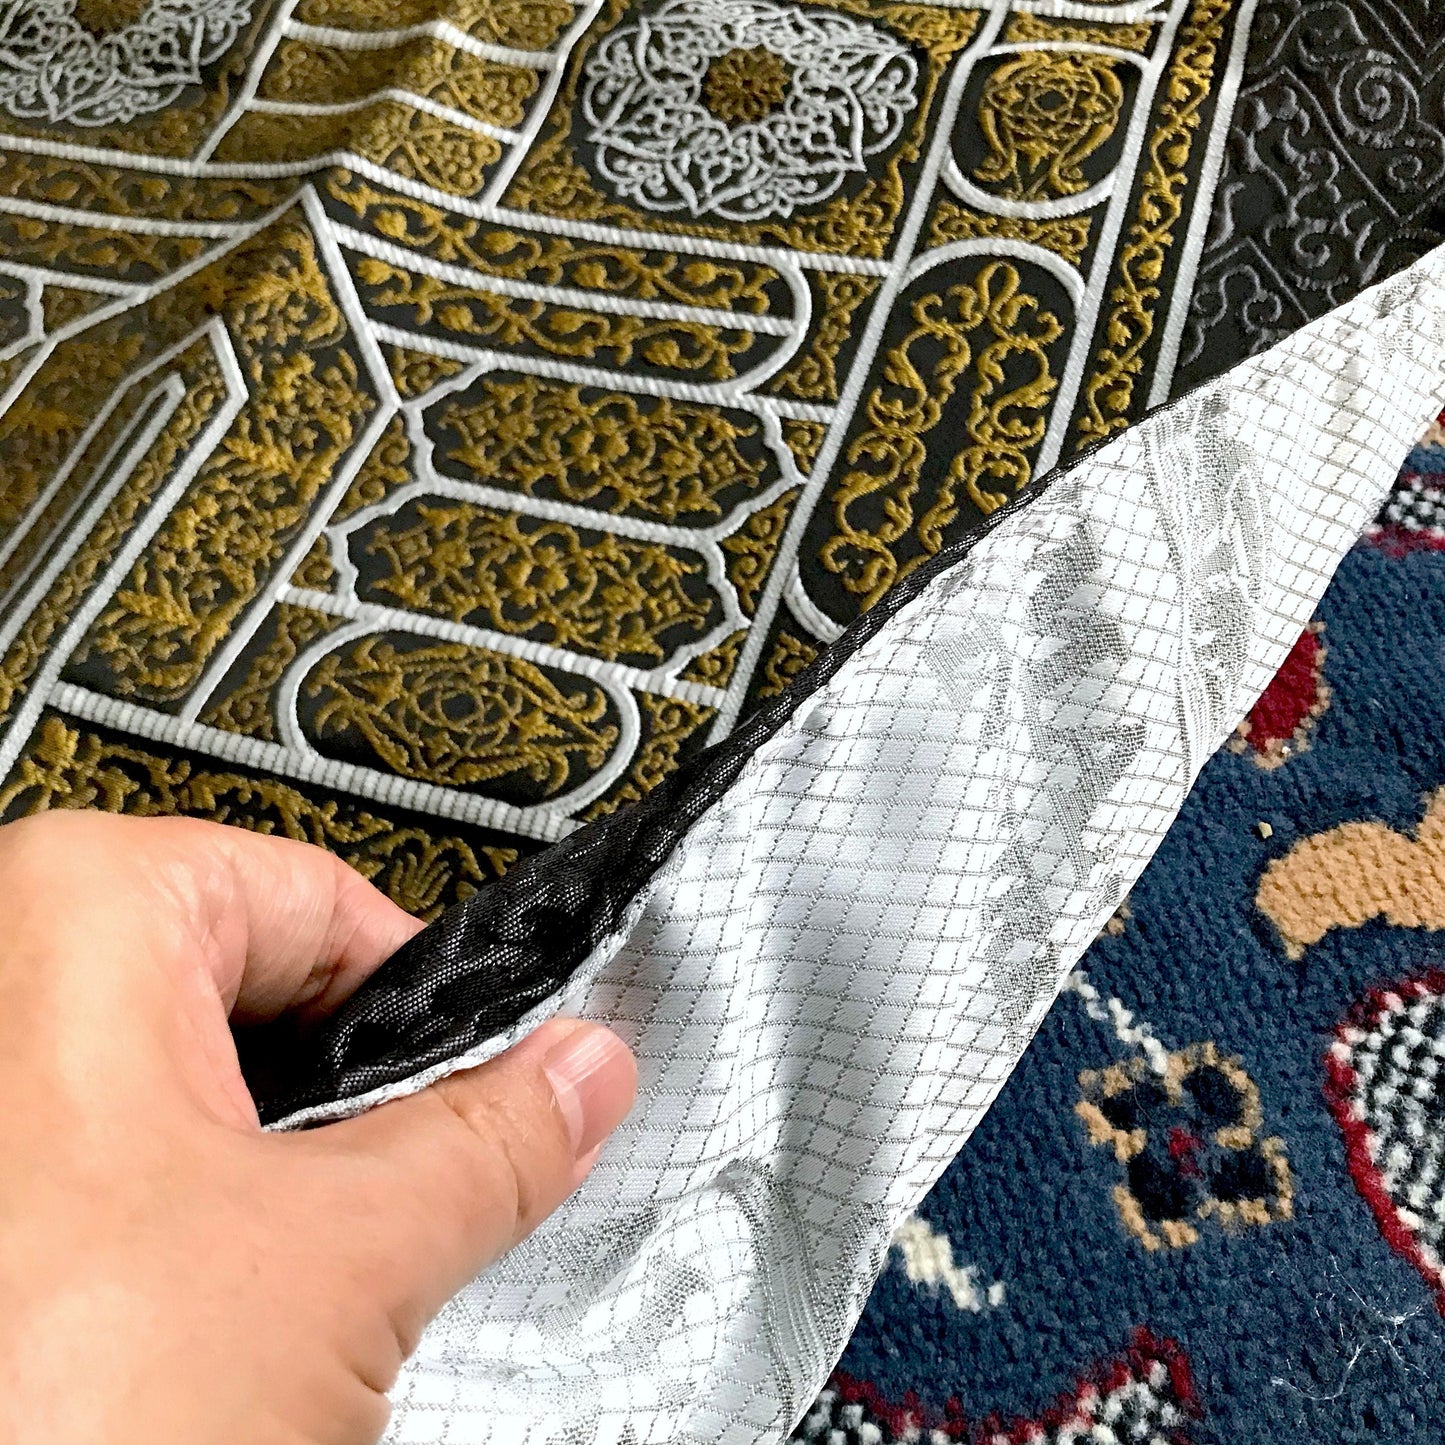 Kaaba Curtain Patterned Lined Prayer Rug  (750g)